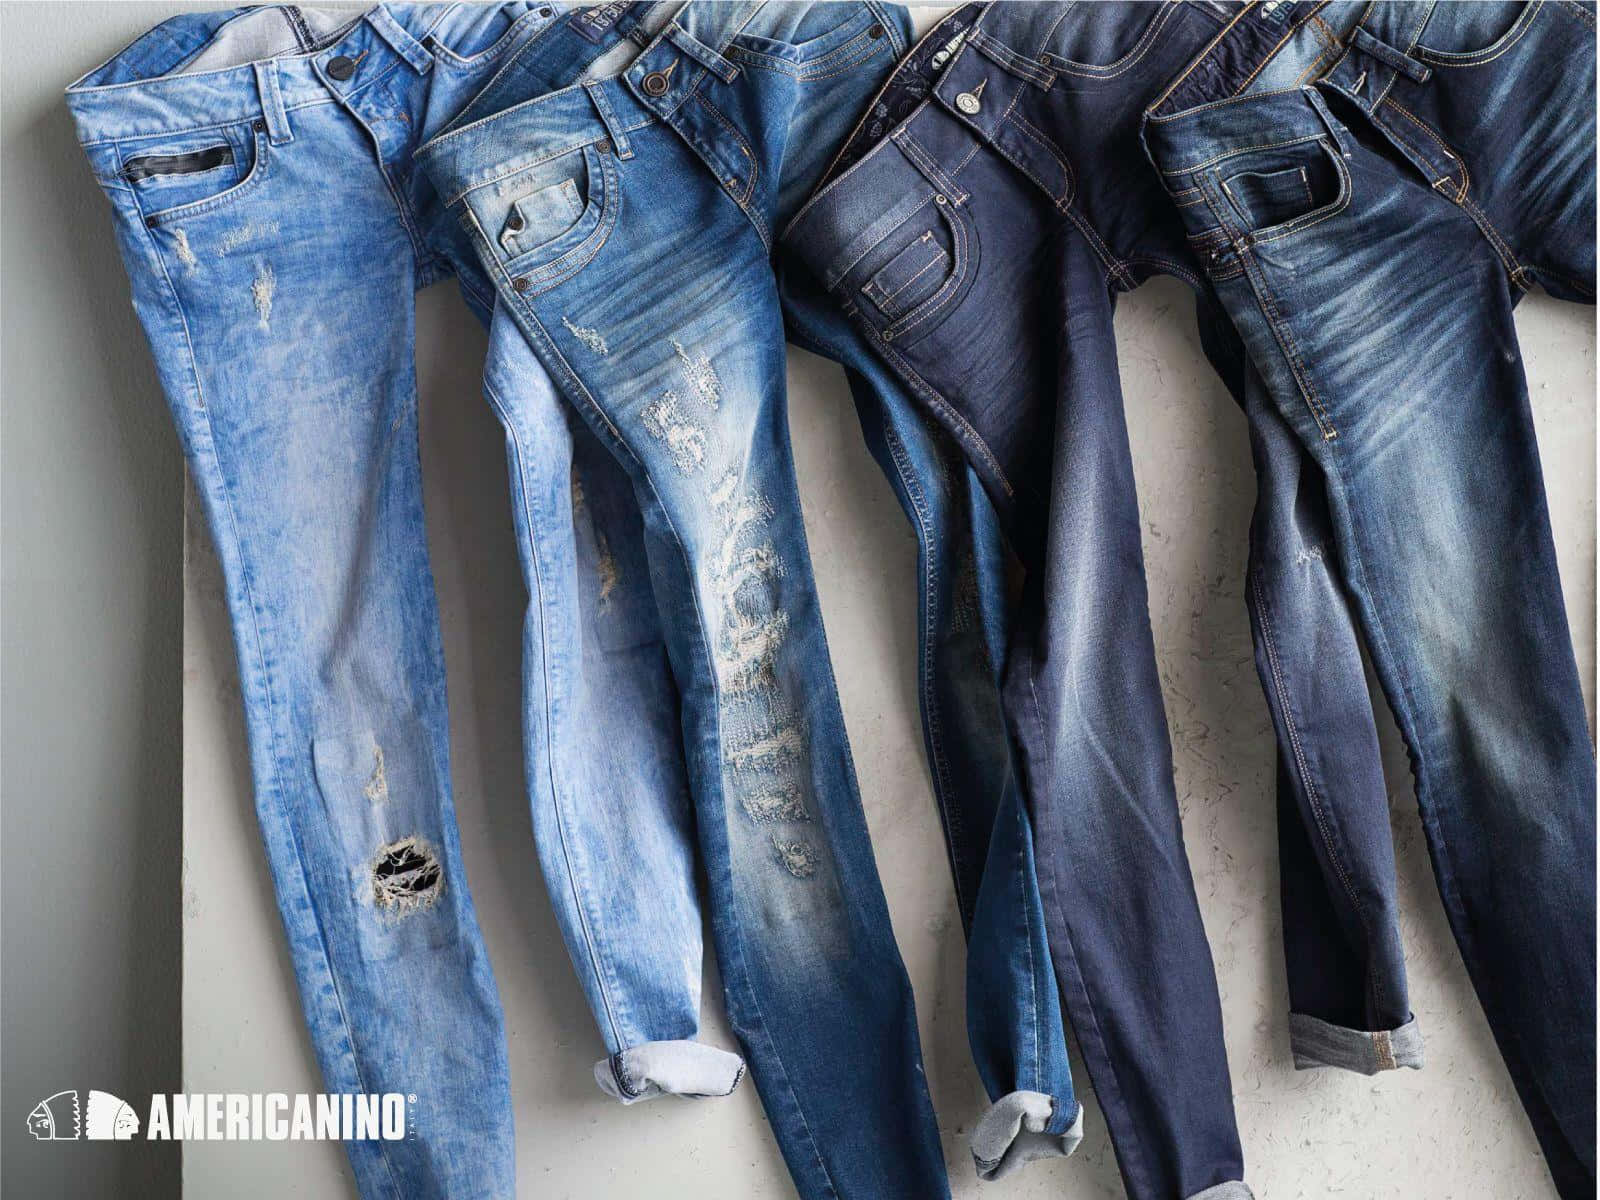 A Close-Up Look of Colorful Jeans